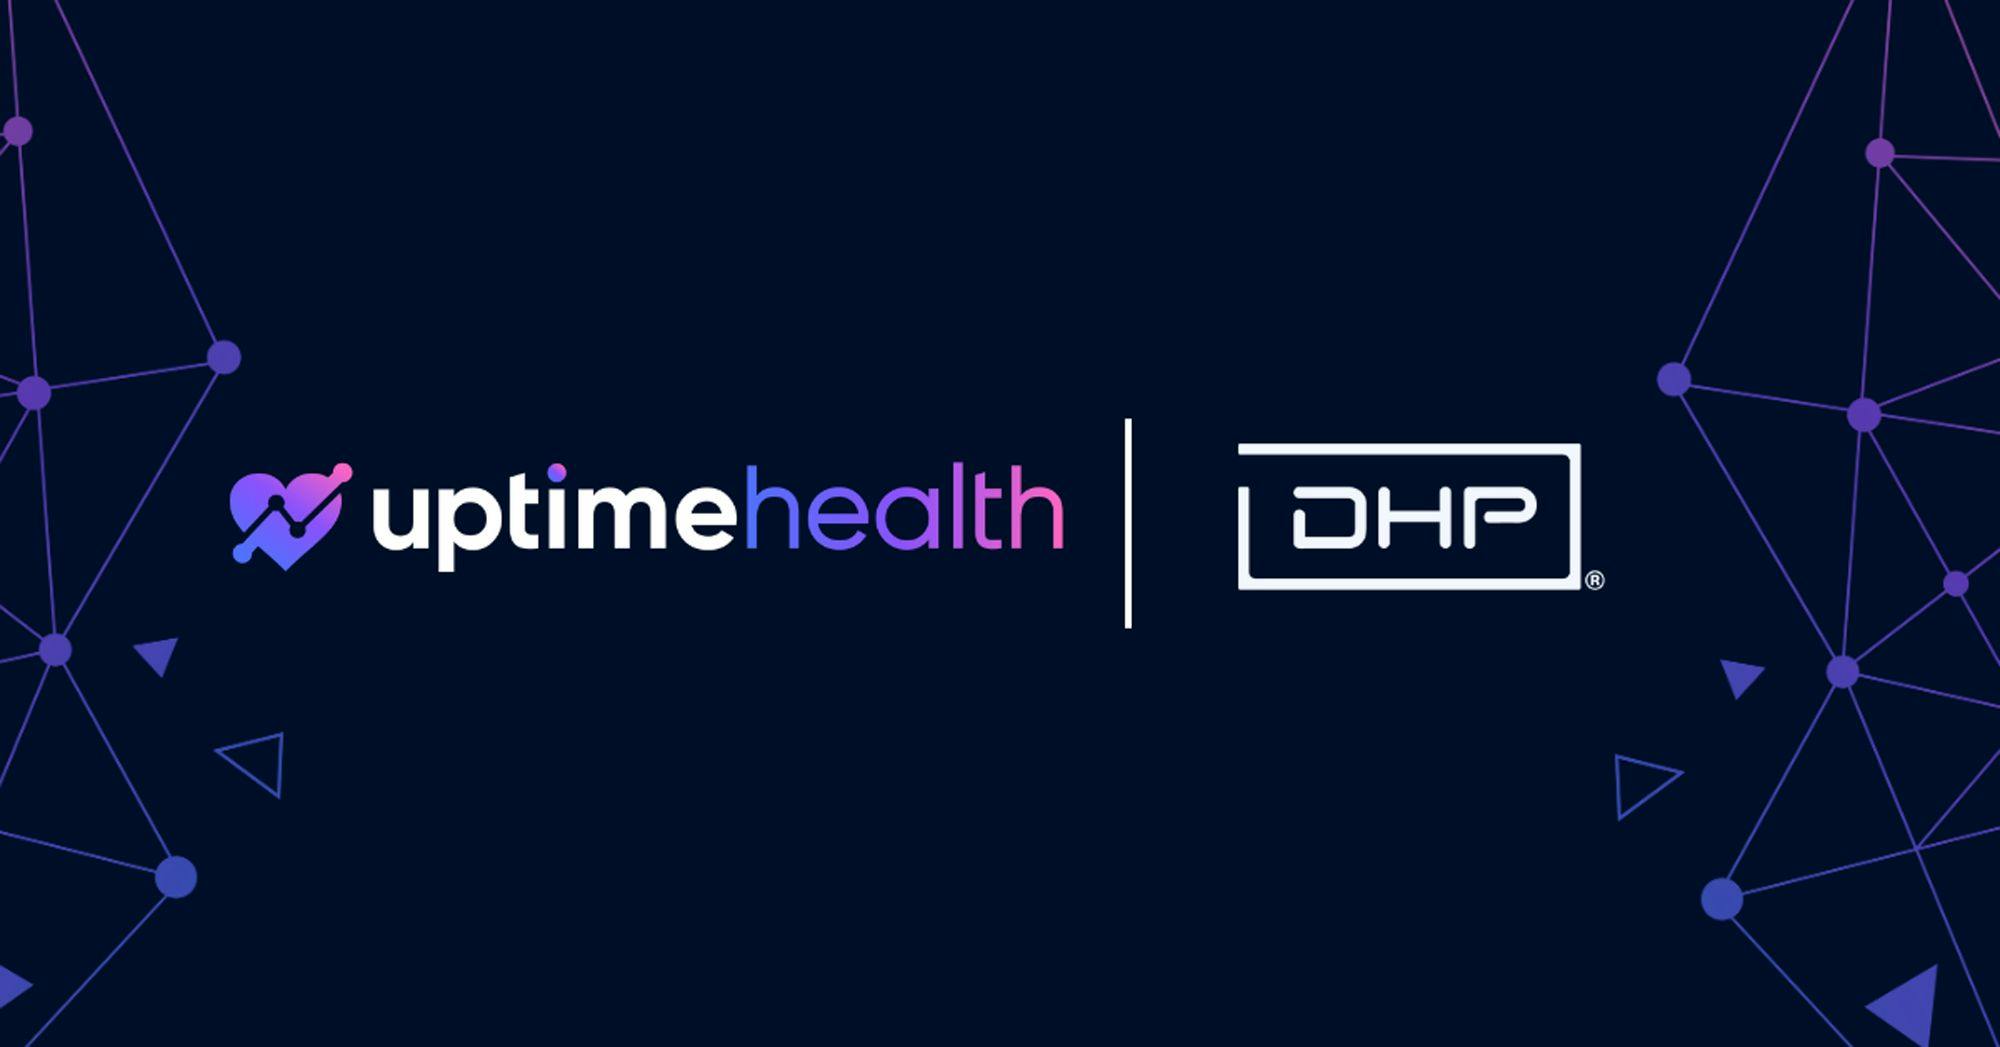 UptimeHealth Partners with Dental Health Products to Expand Dental Product and Equipment Access. Image: © UptimeHealth